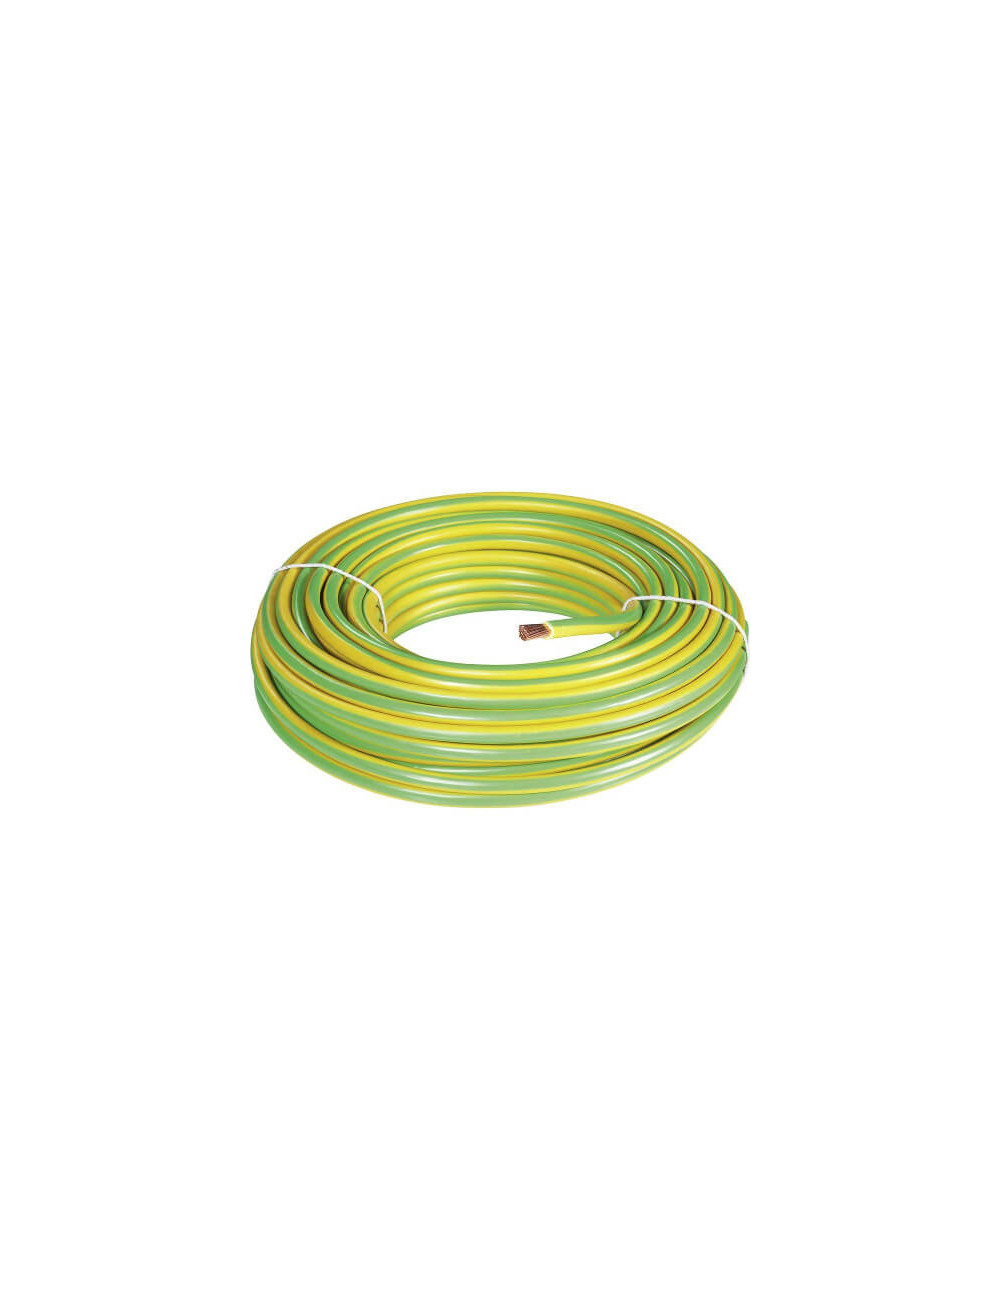 Solar Cable or PV Cable 6mm Earth Green/Yellow 100m Rolls – Oliross Solar